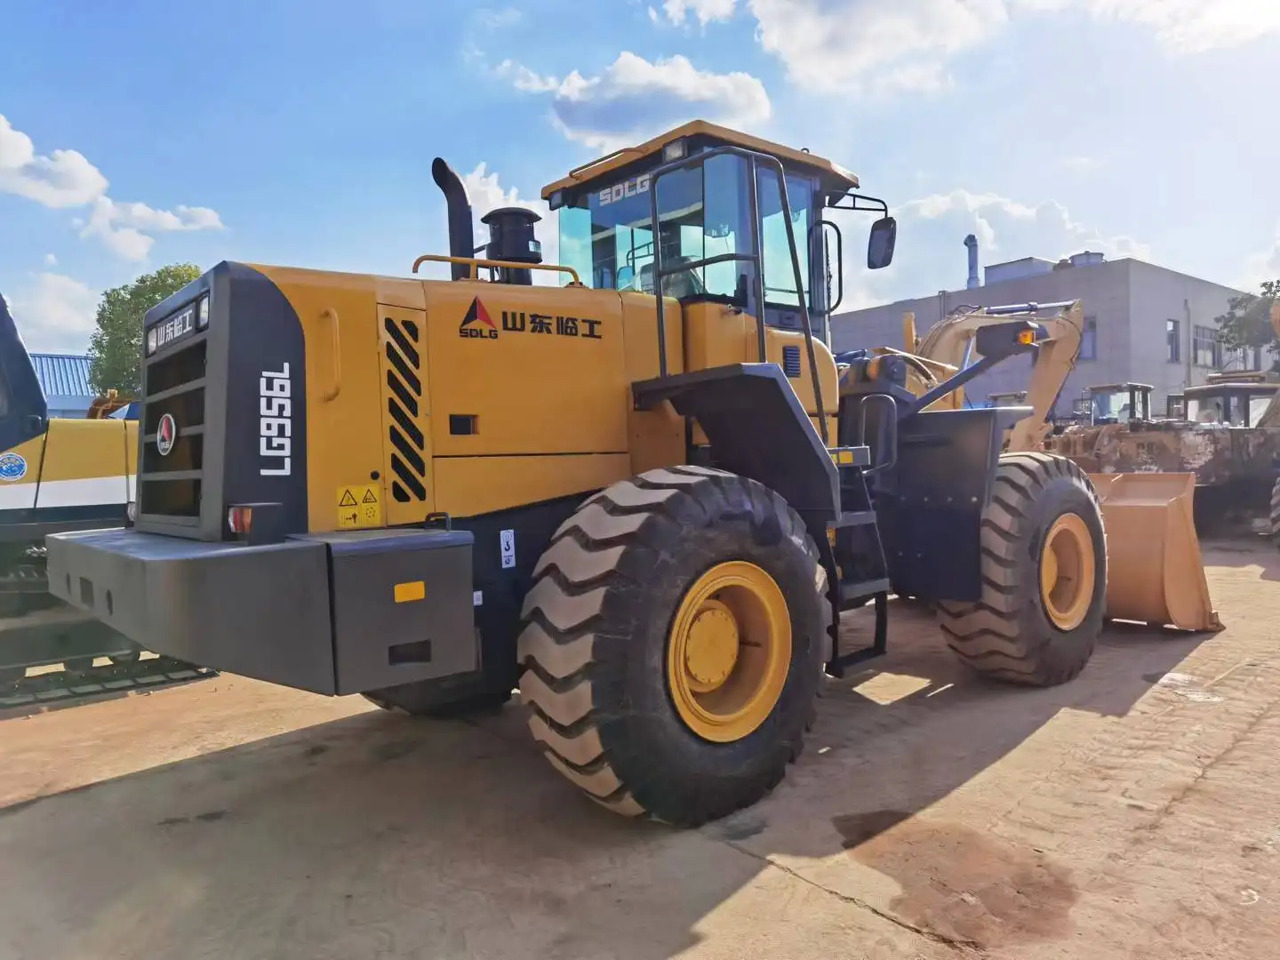 Wiellader Used SDLlG Wheel loader 936 956 on sale with good running condition